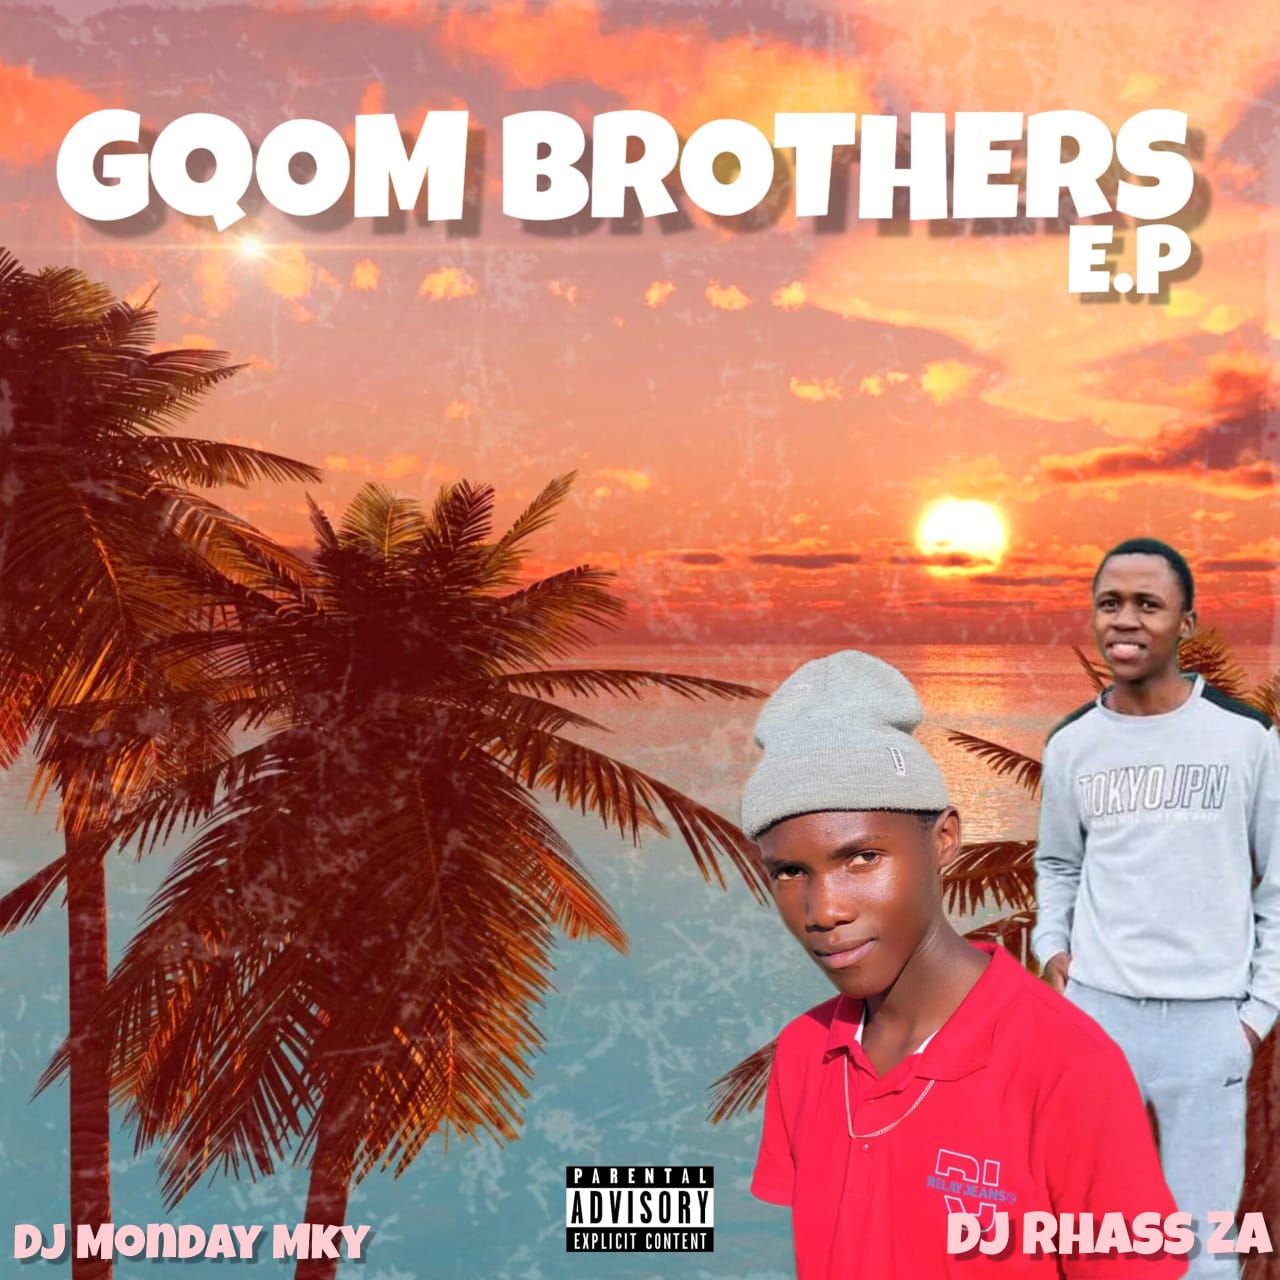 GqomBrothers EP - DJMONDAYMKY FT.RHASS